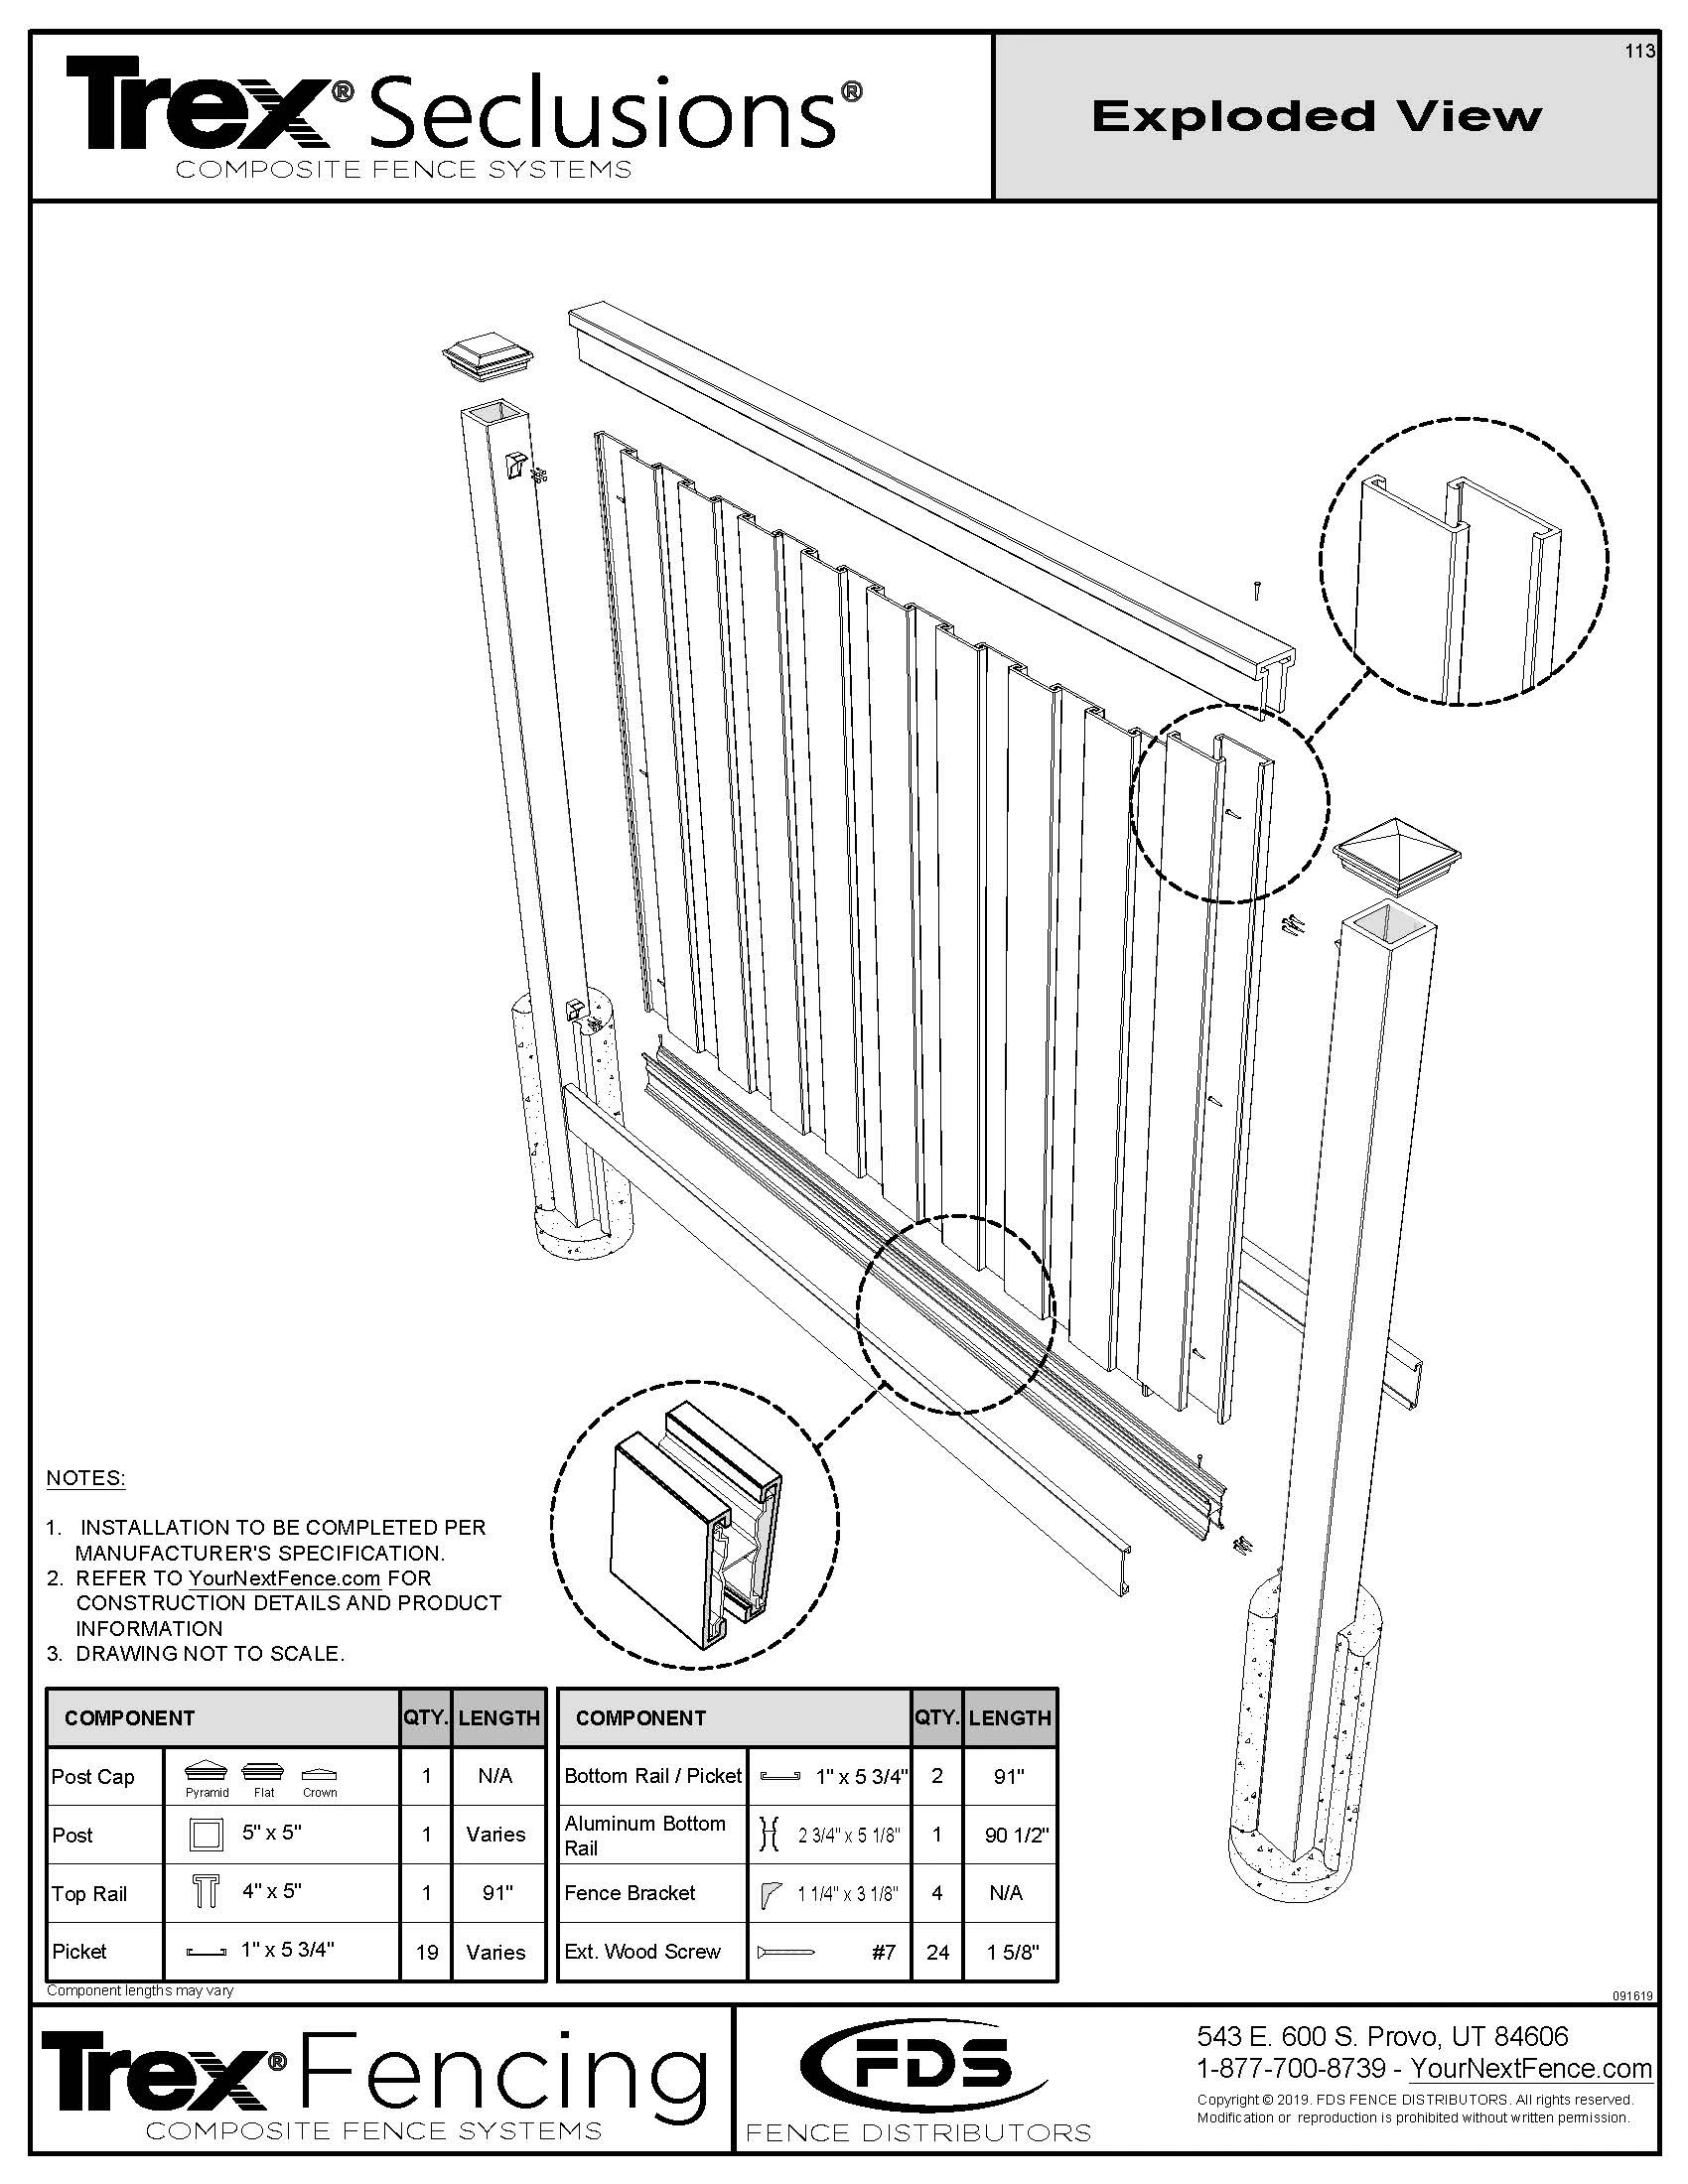 Trex Seclusions Fence Panel Kit - 9-ft. Tall 9